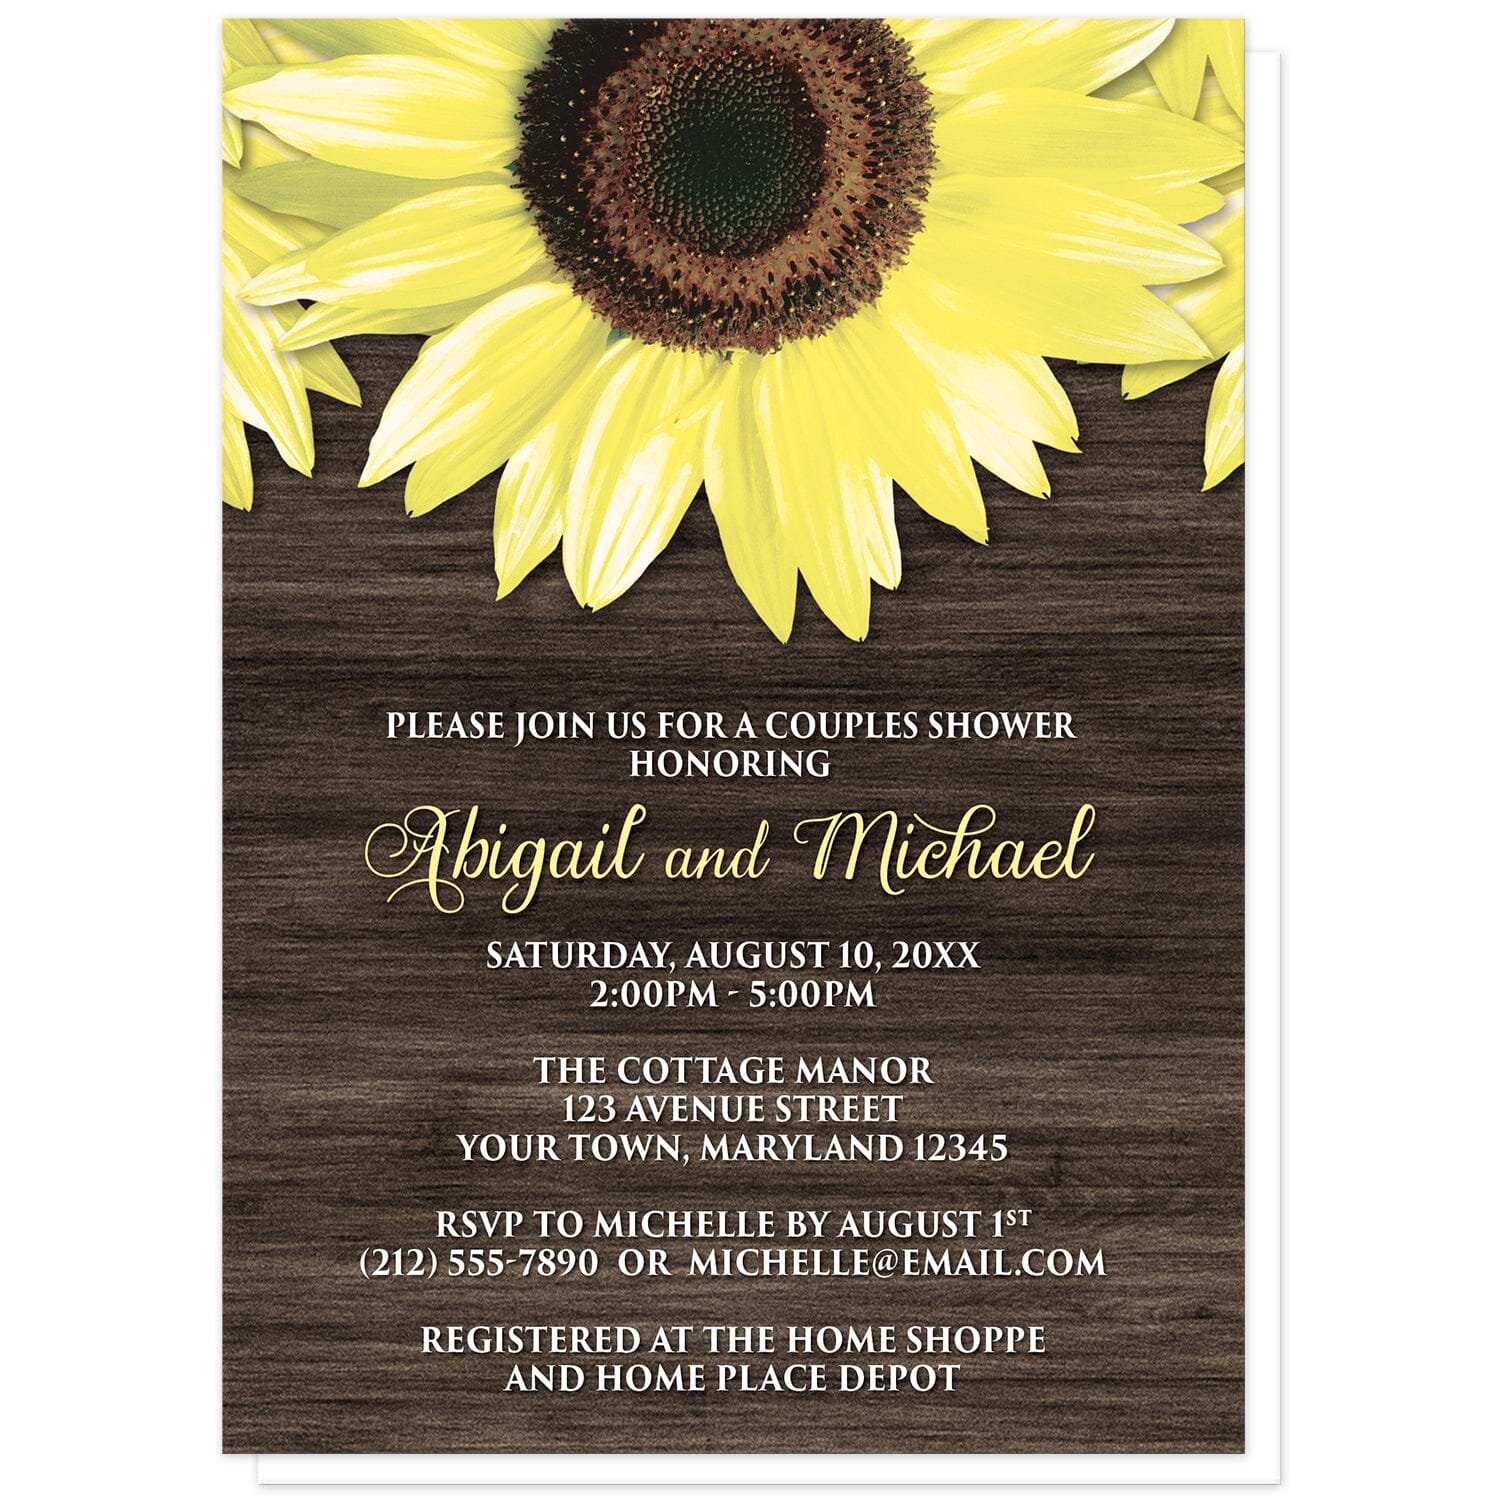 Rustic Sunflower and Wood Couples Shower Invitations at Artistically Invited. Southern-inspired rustic sunflower and wood couples shower invitations designed with large yellow sunflowers along the top over a country brown wood design. Your personalized couples shower celebration details are custom printed in yellow and white over the brown wood background below the pretty sunflowers. 